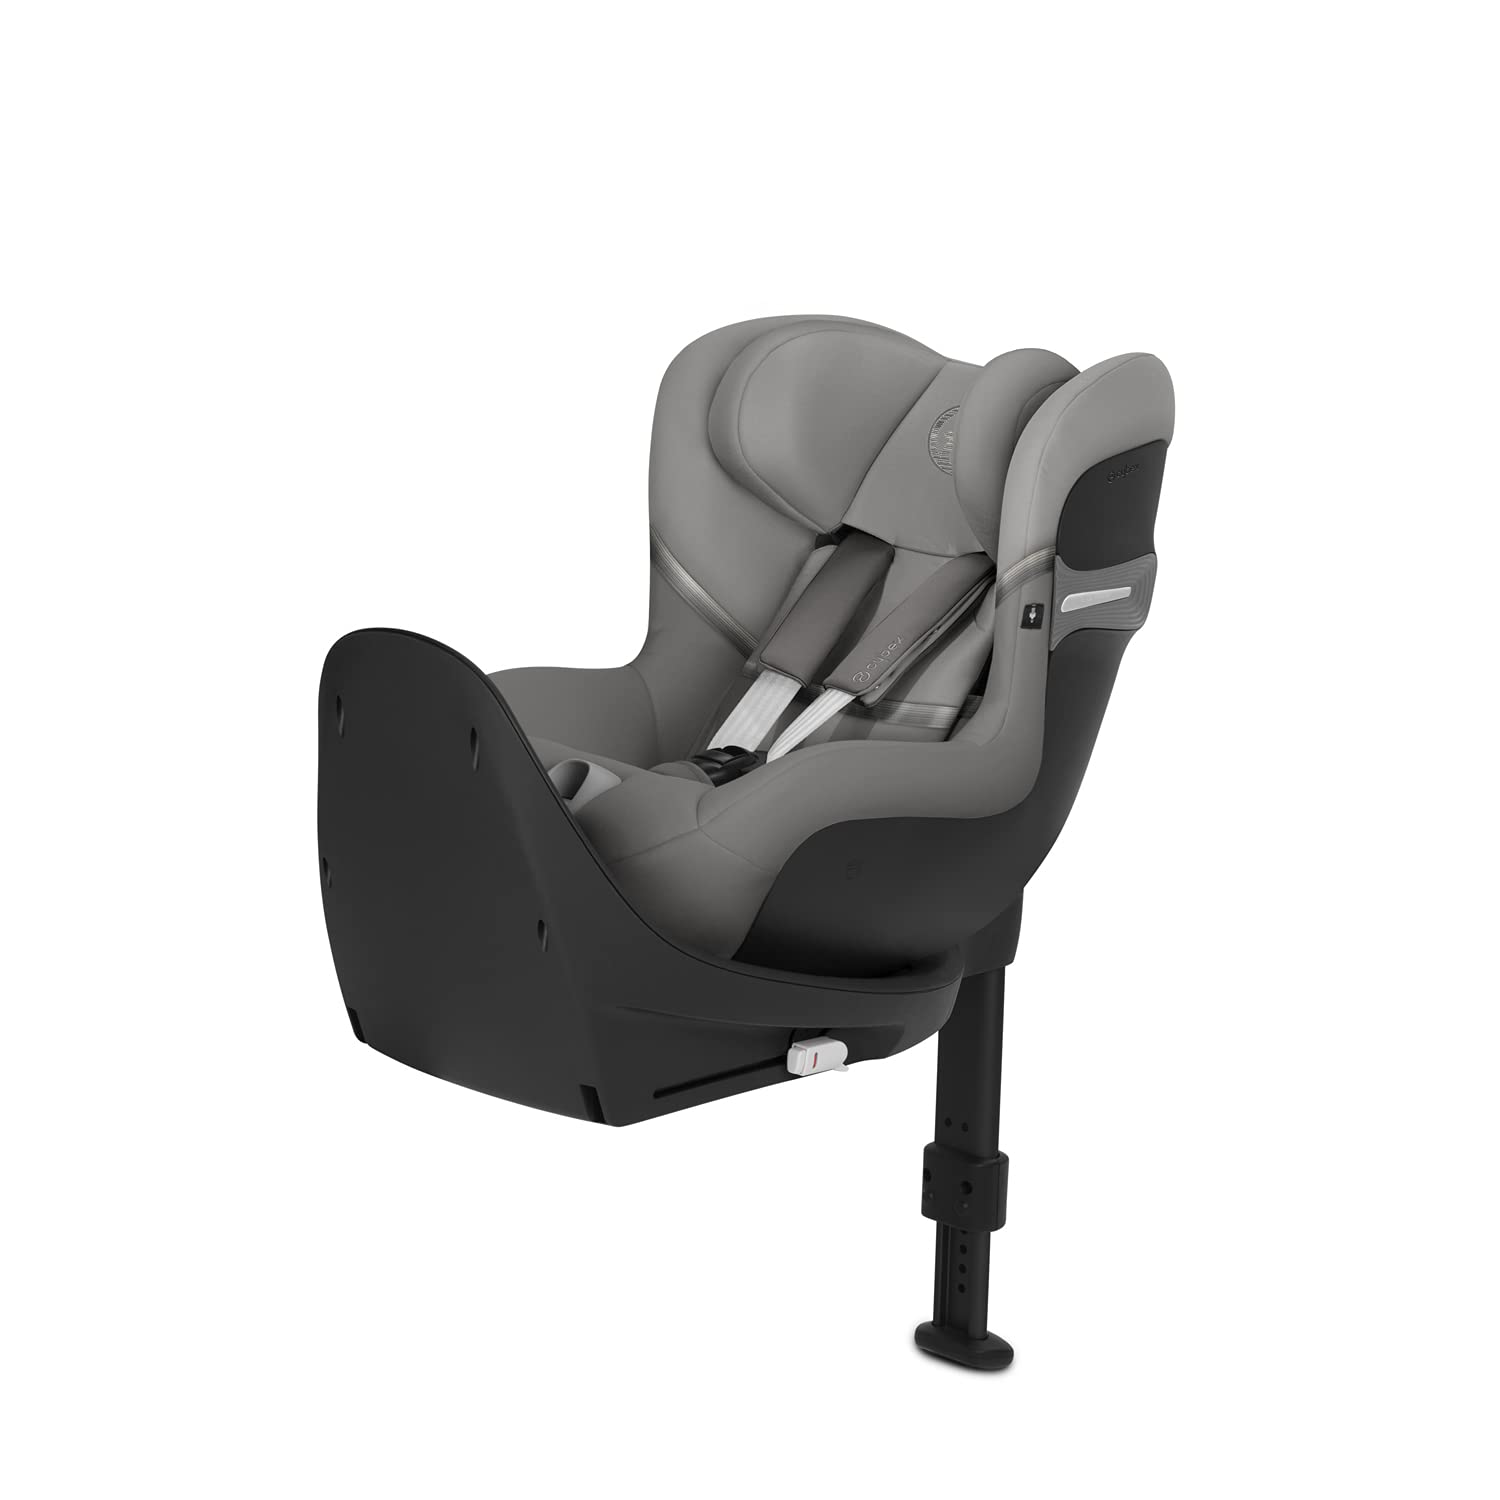 CYBEX Gold Sirona S2 i-Size Car Seat from 3 Months to 4 Years Maximum 18 kg SensorSafe Compatible Soho Grey